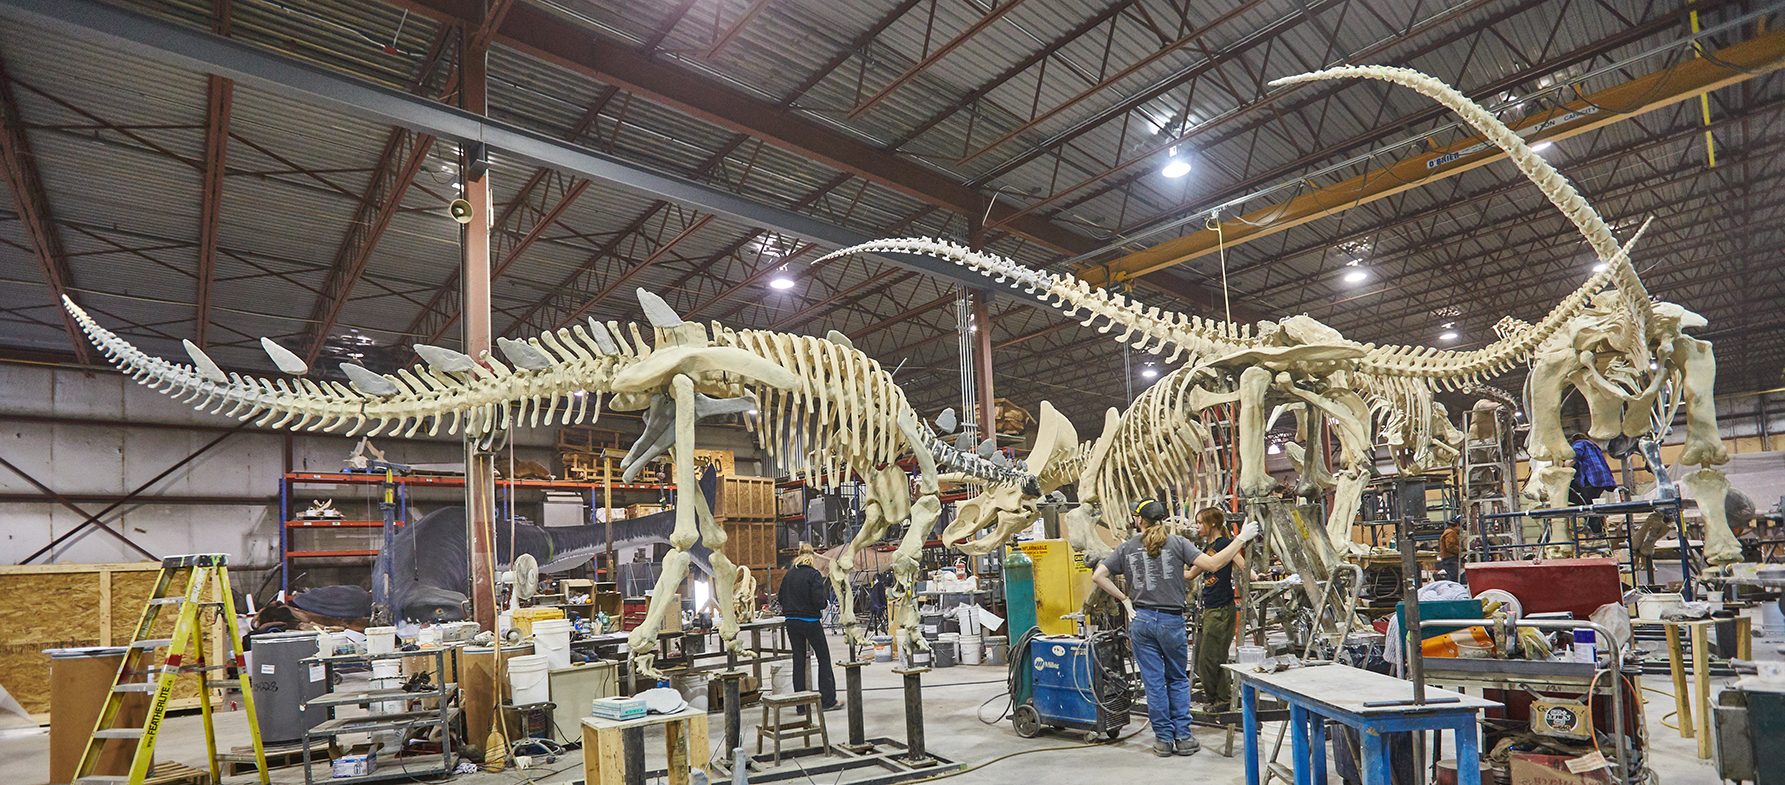 RCI facility can accommodate the tallest dinosaurs